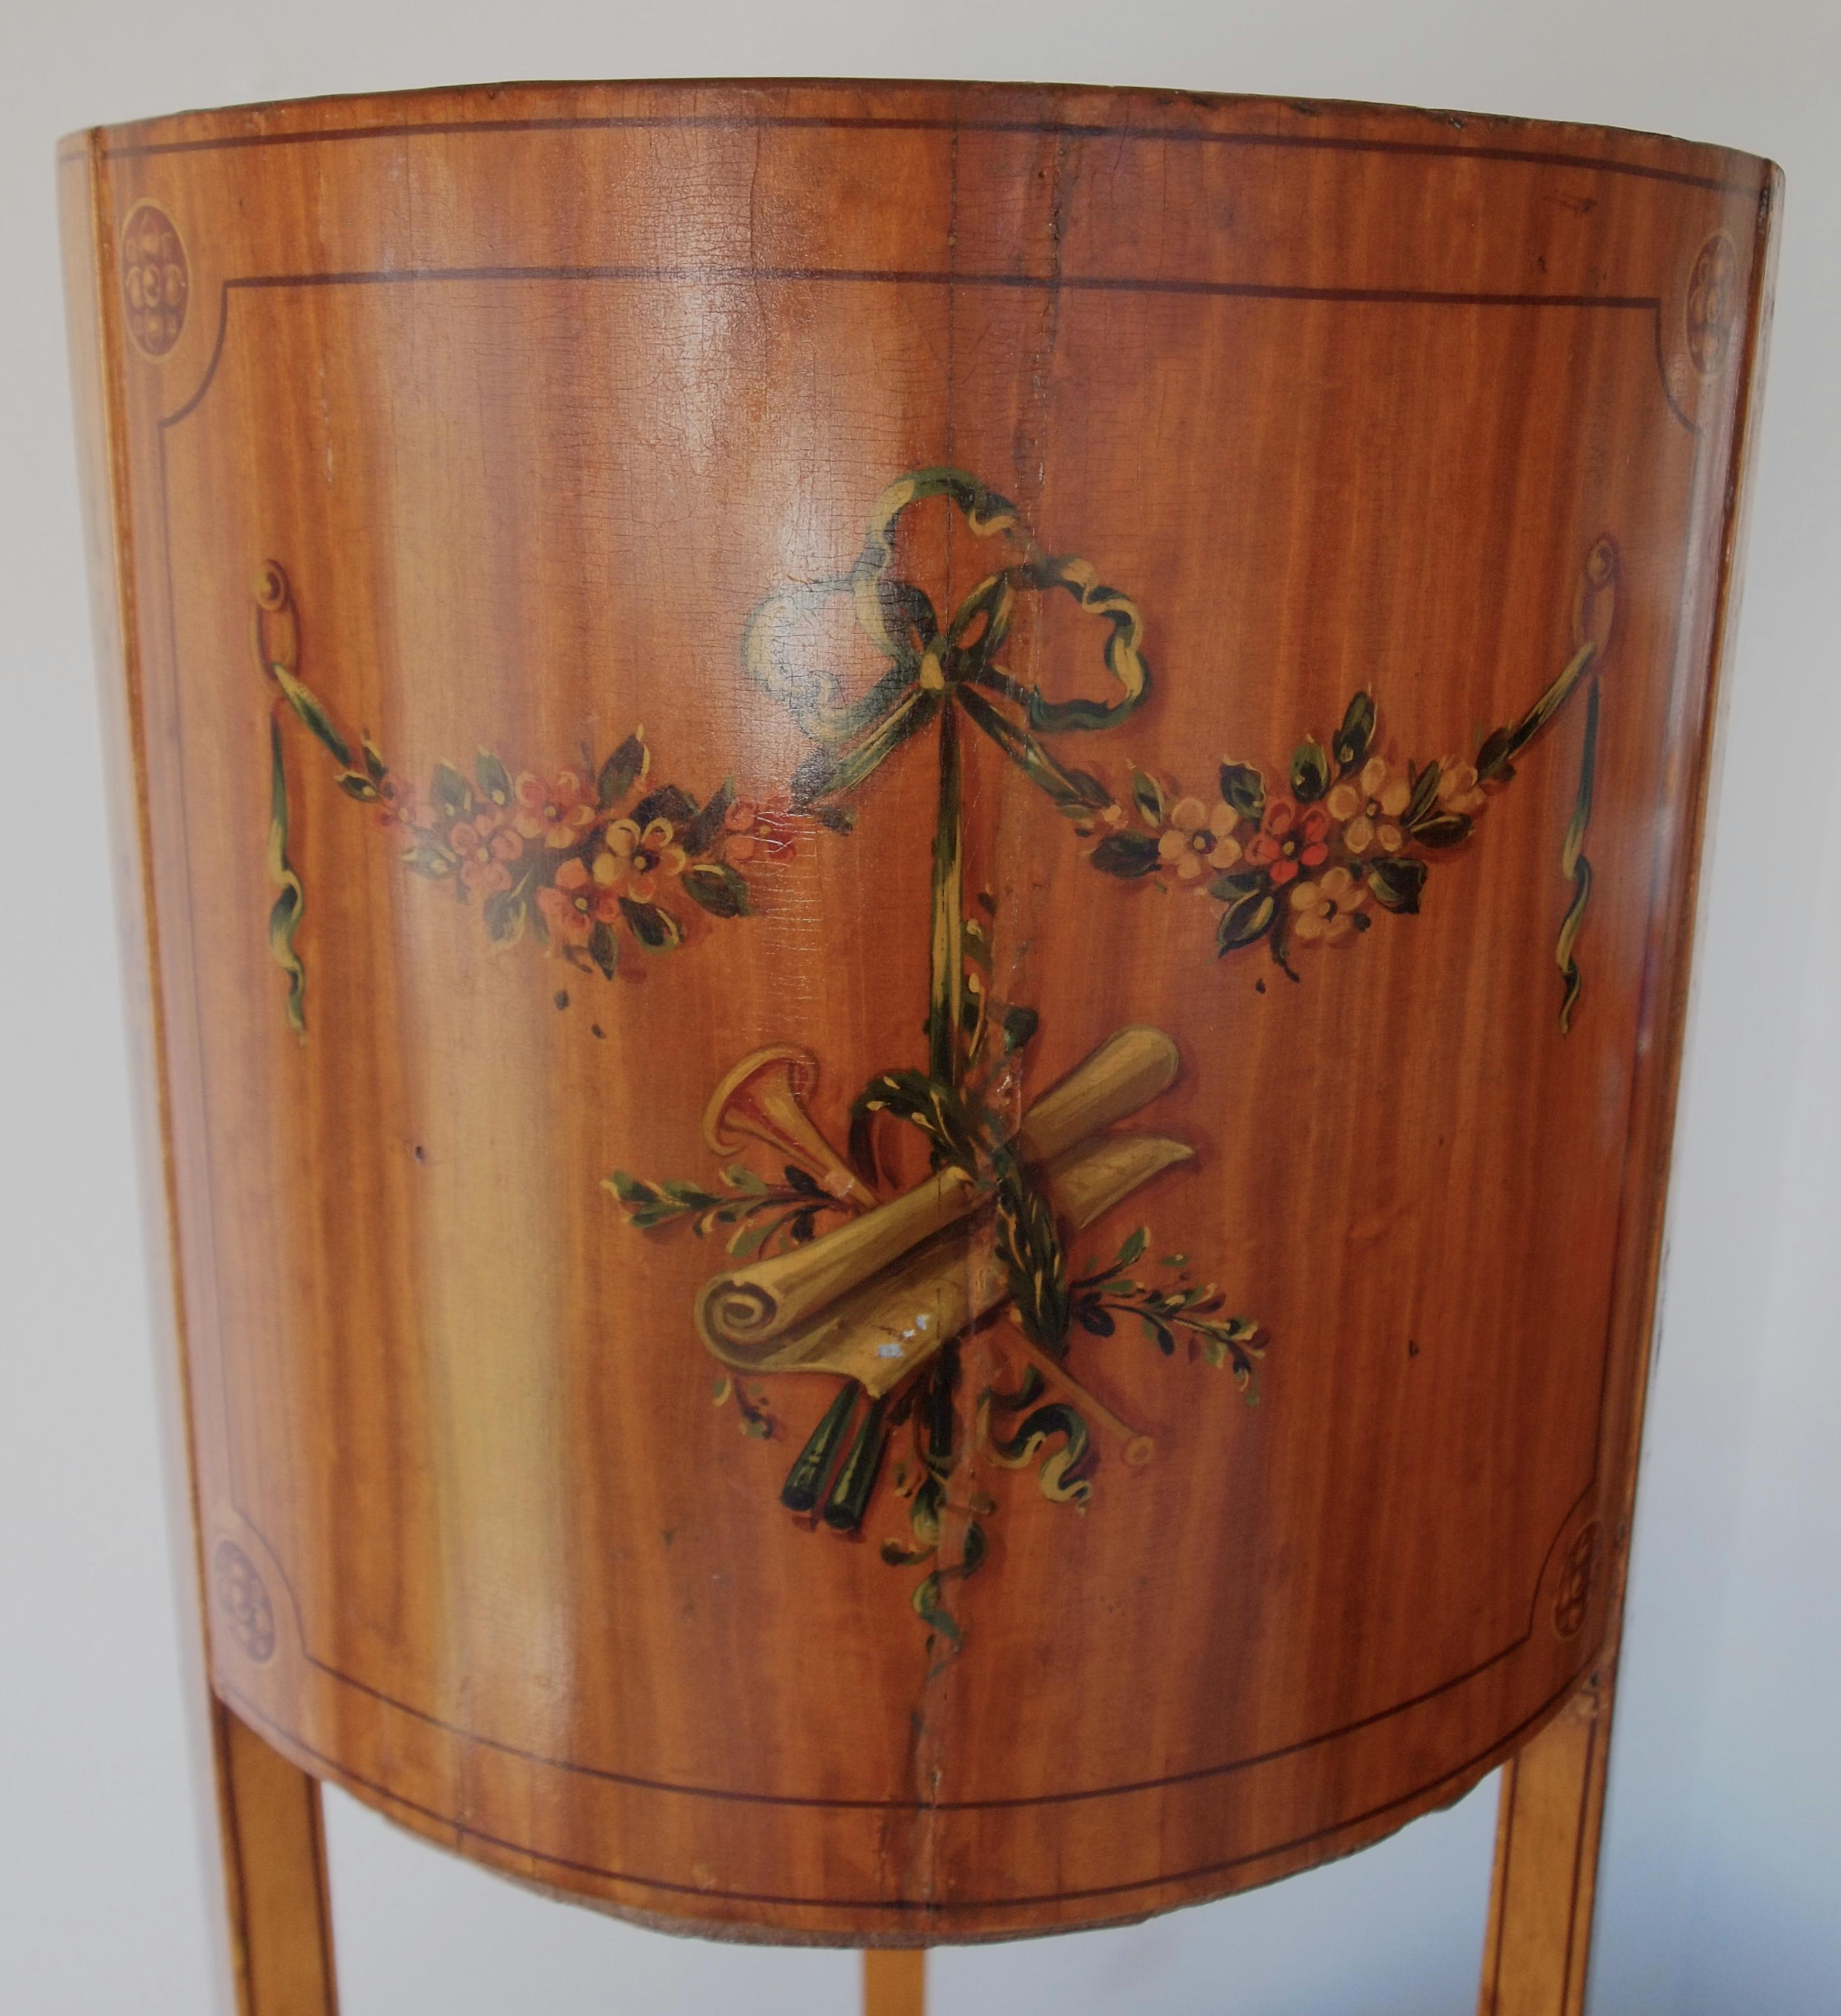 19th Century Sheraton Revival Satinwood Round Planter with Painted Decoration